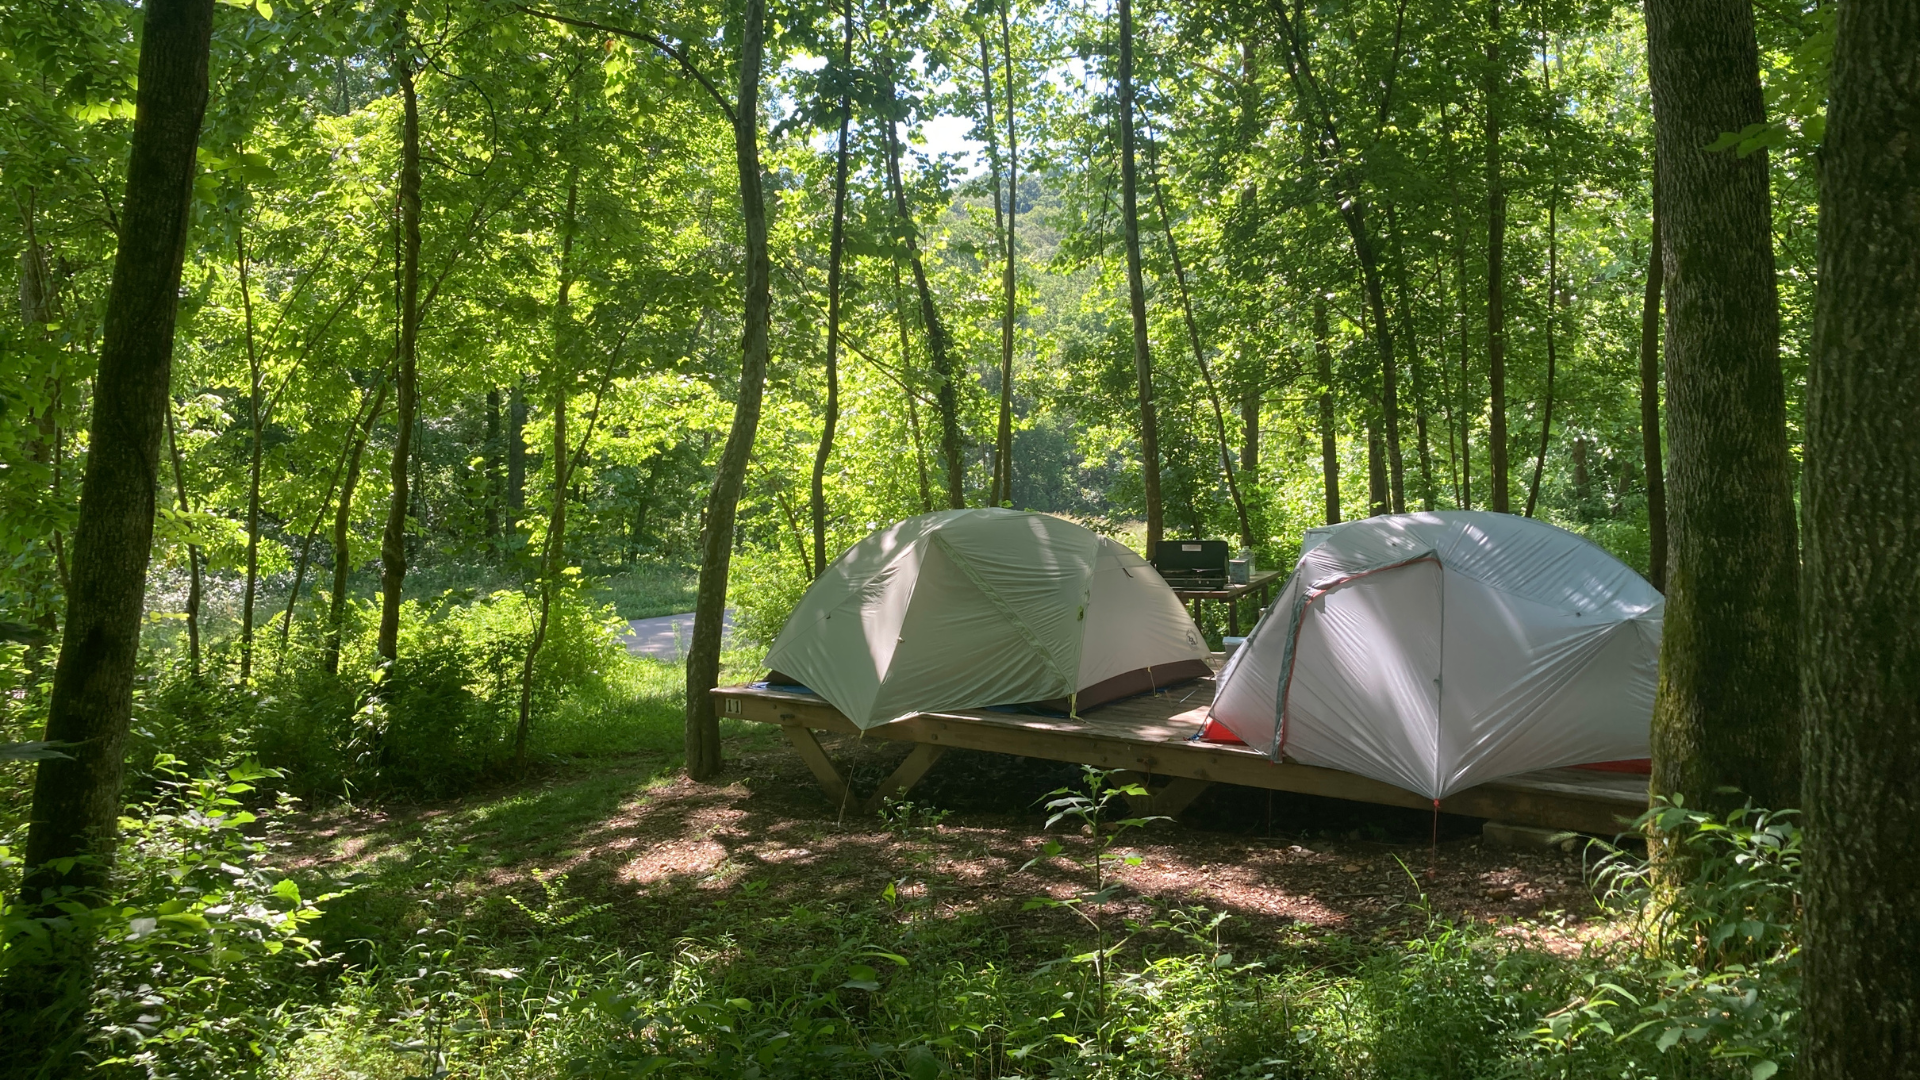 Two camping tents (silver) on a wooden platform in the woods. The trees are green and glowing in the sunlight.